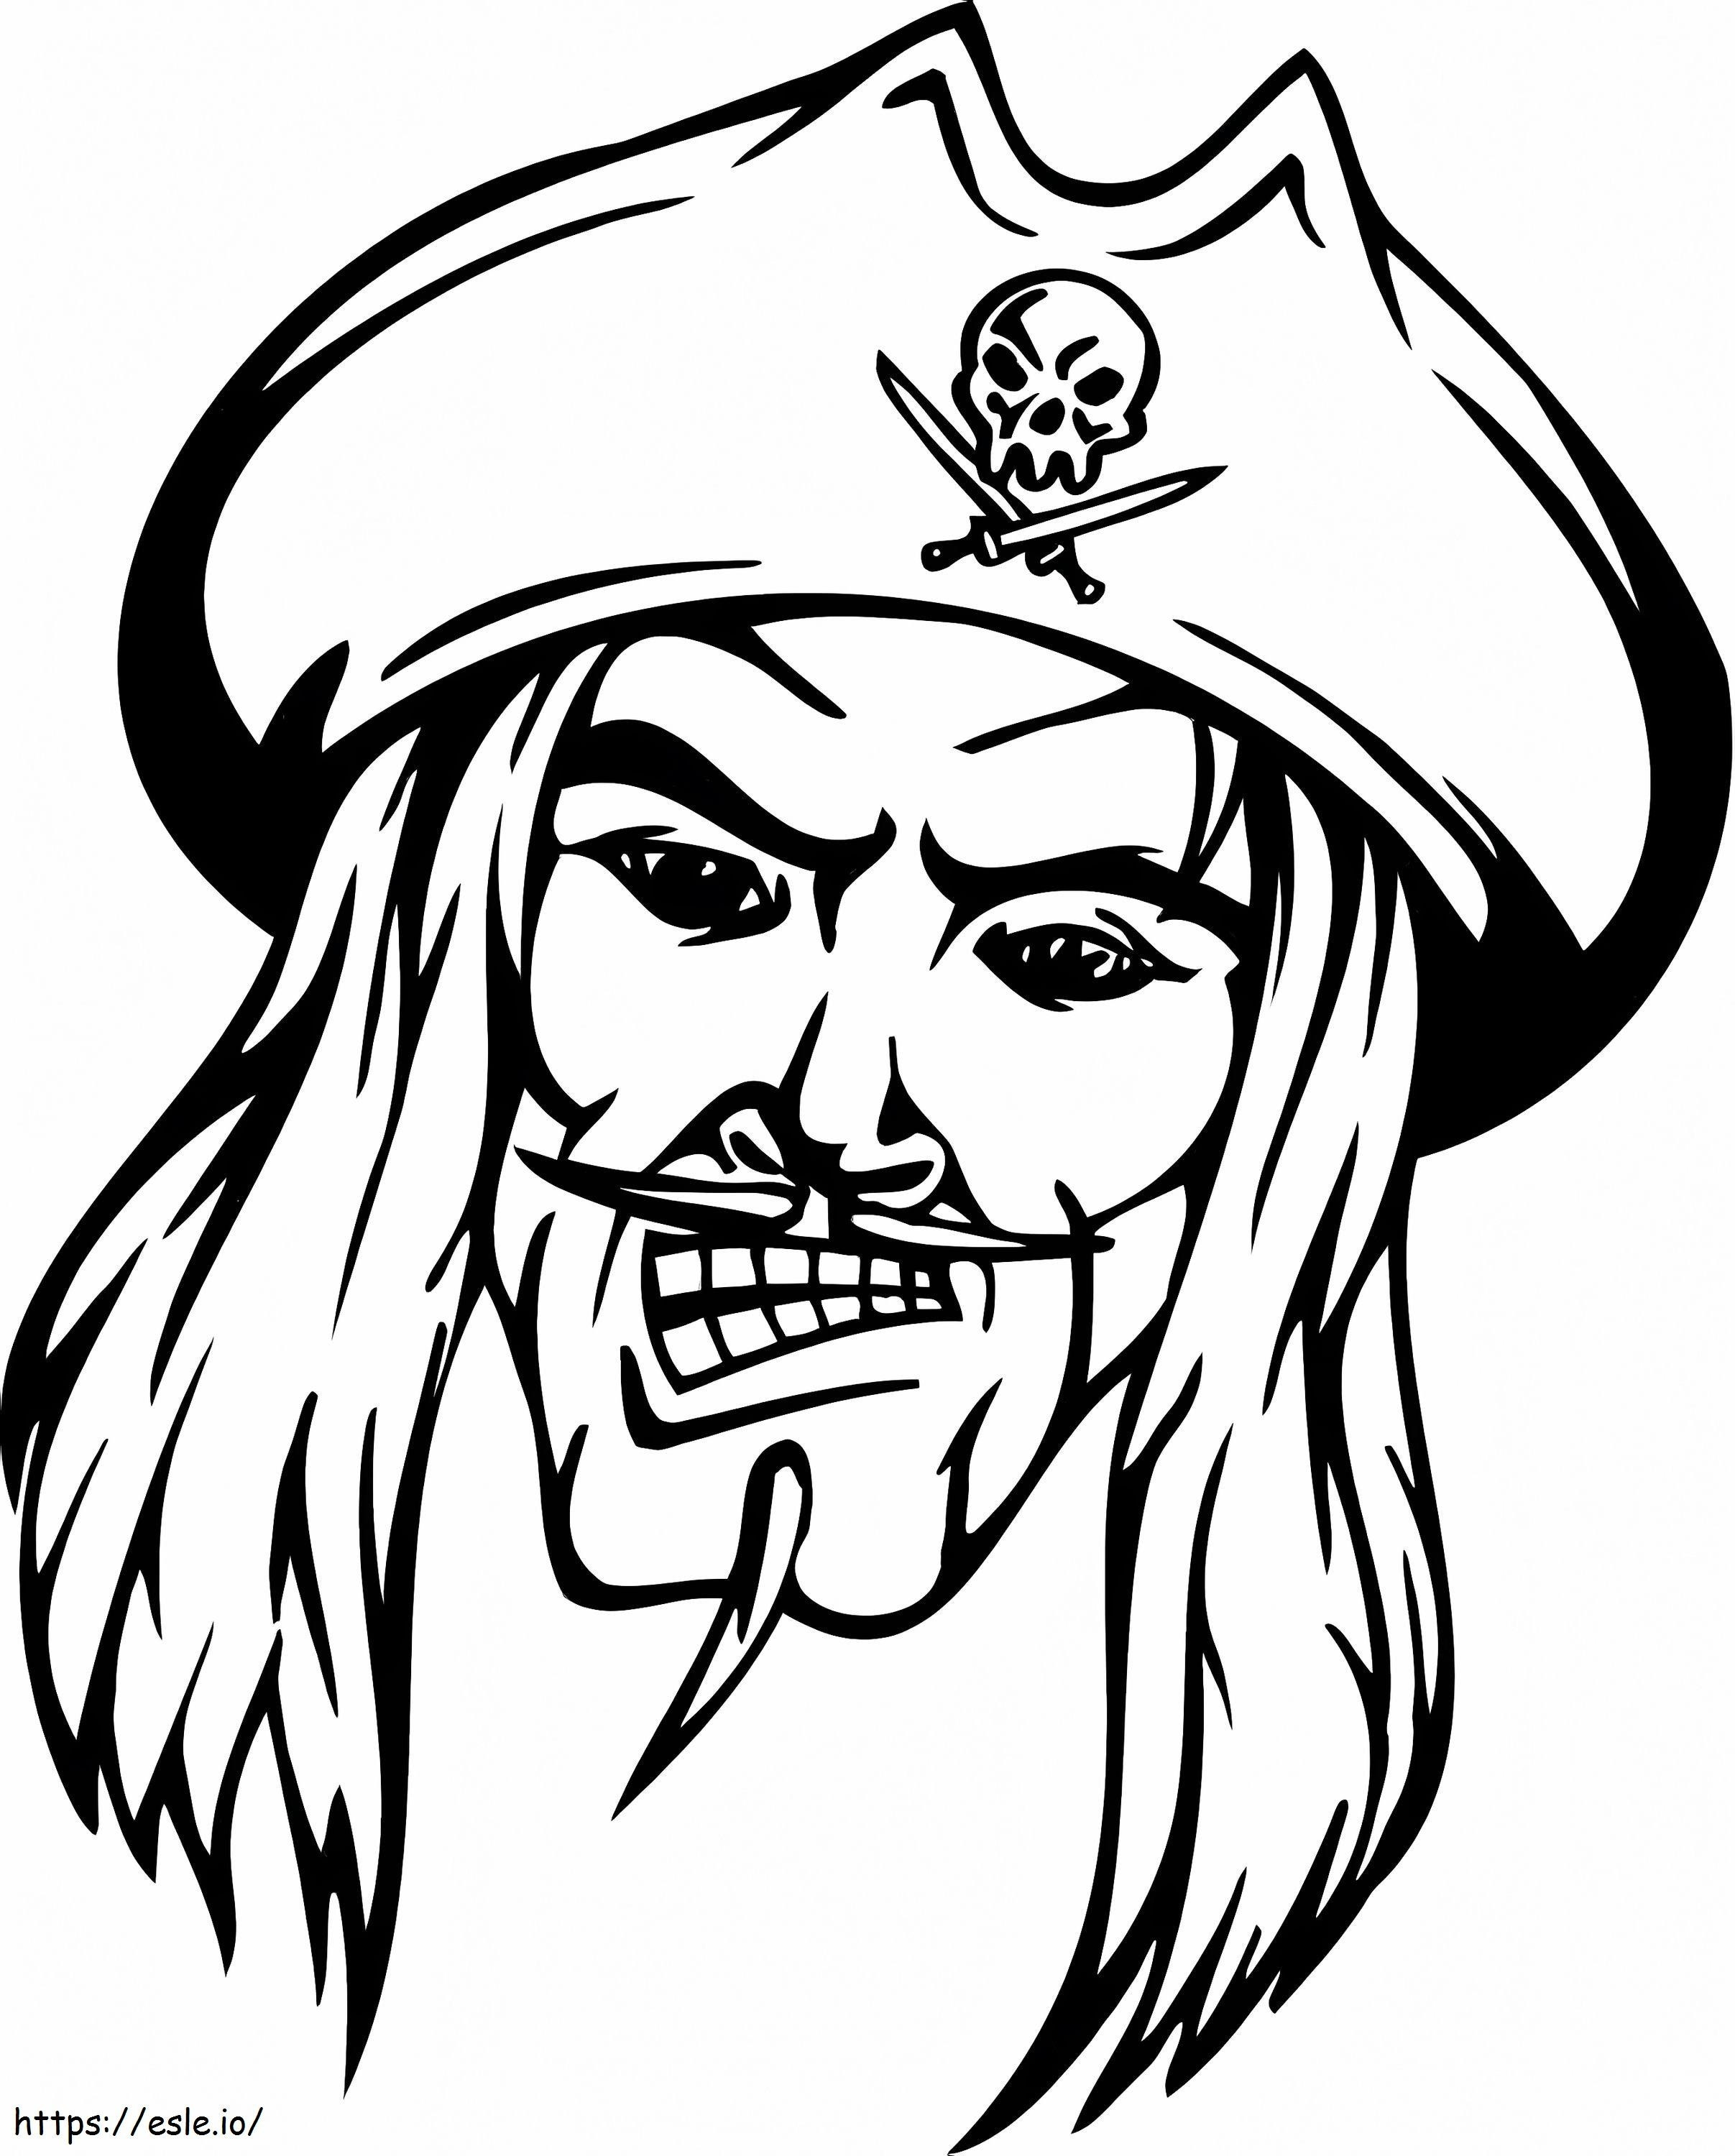 Pirate Mascot coloring page